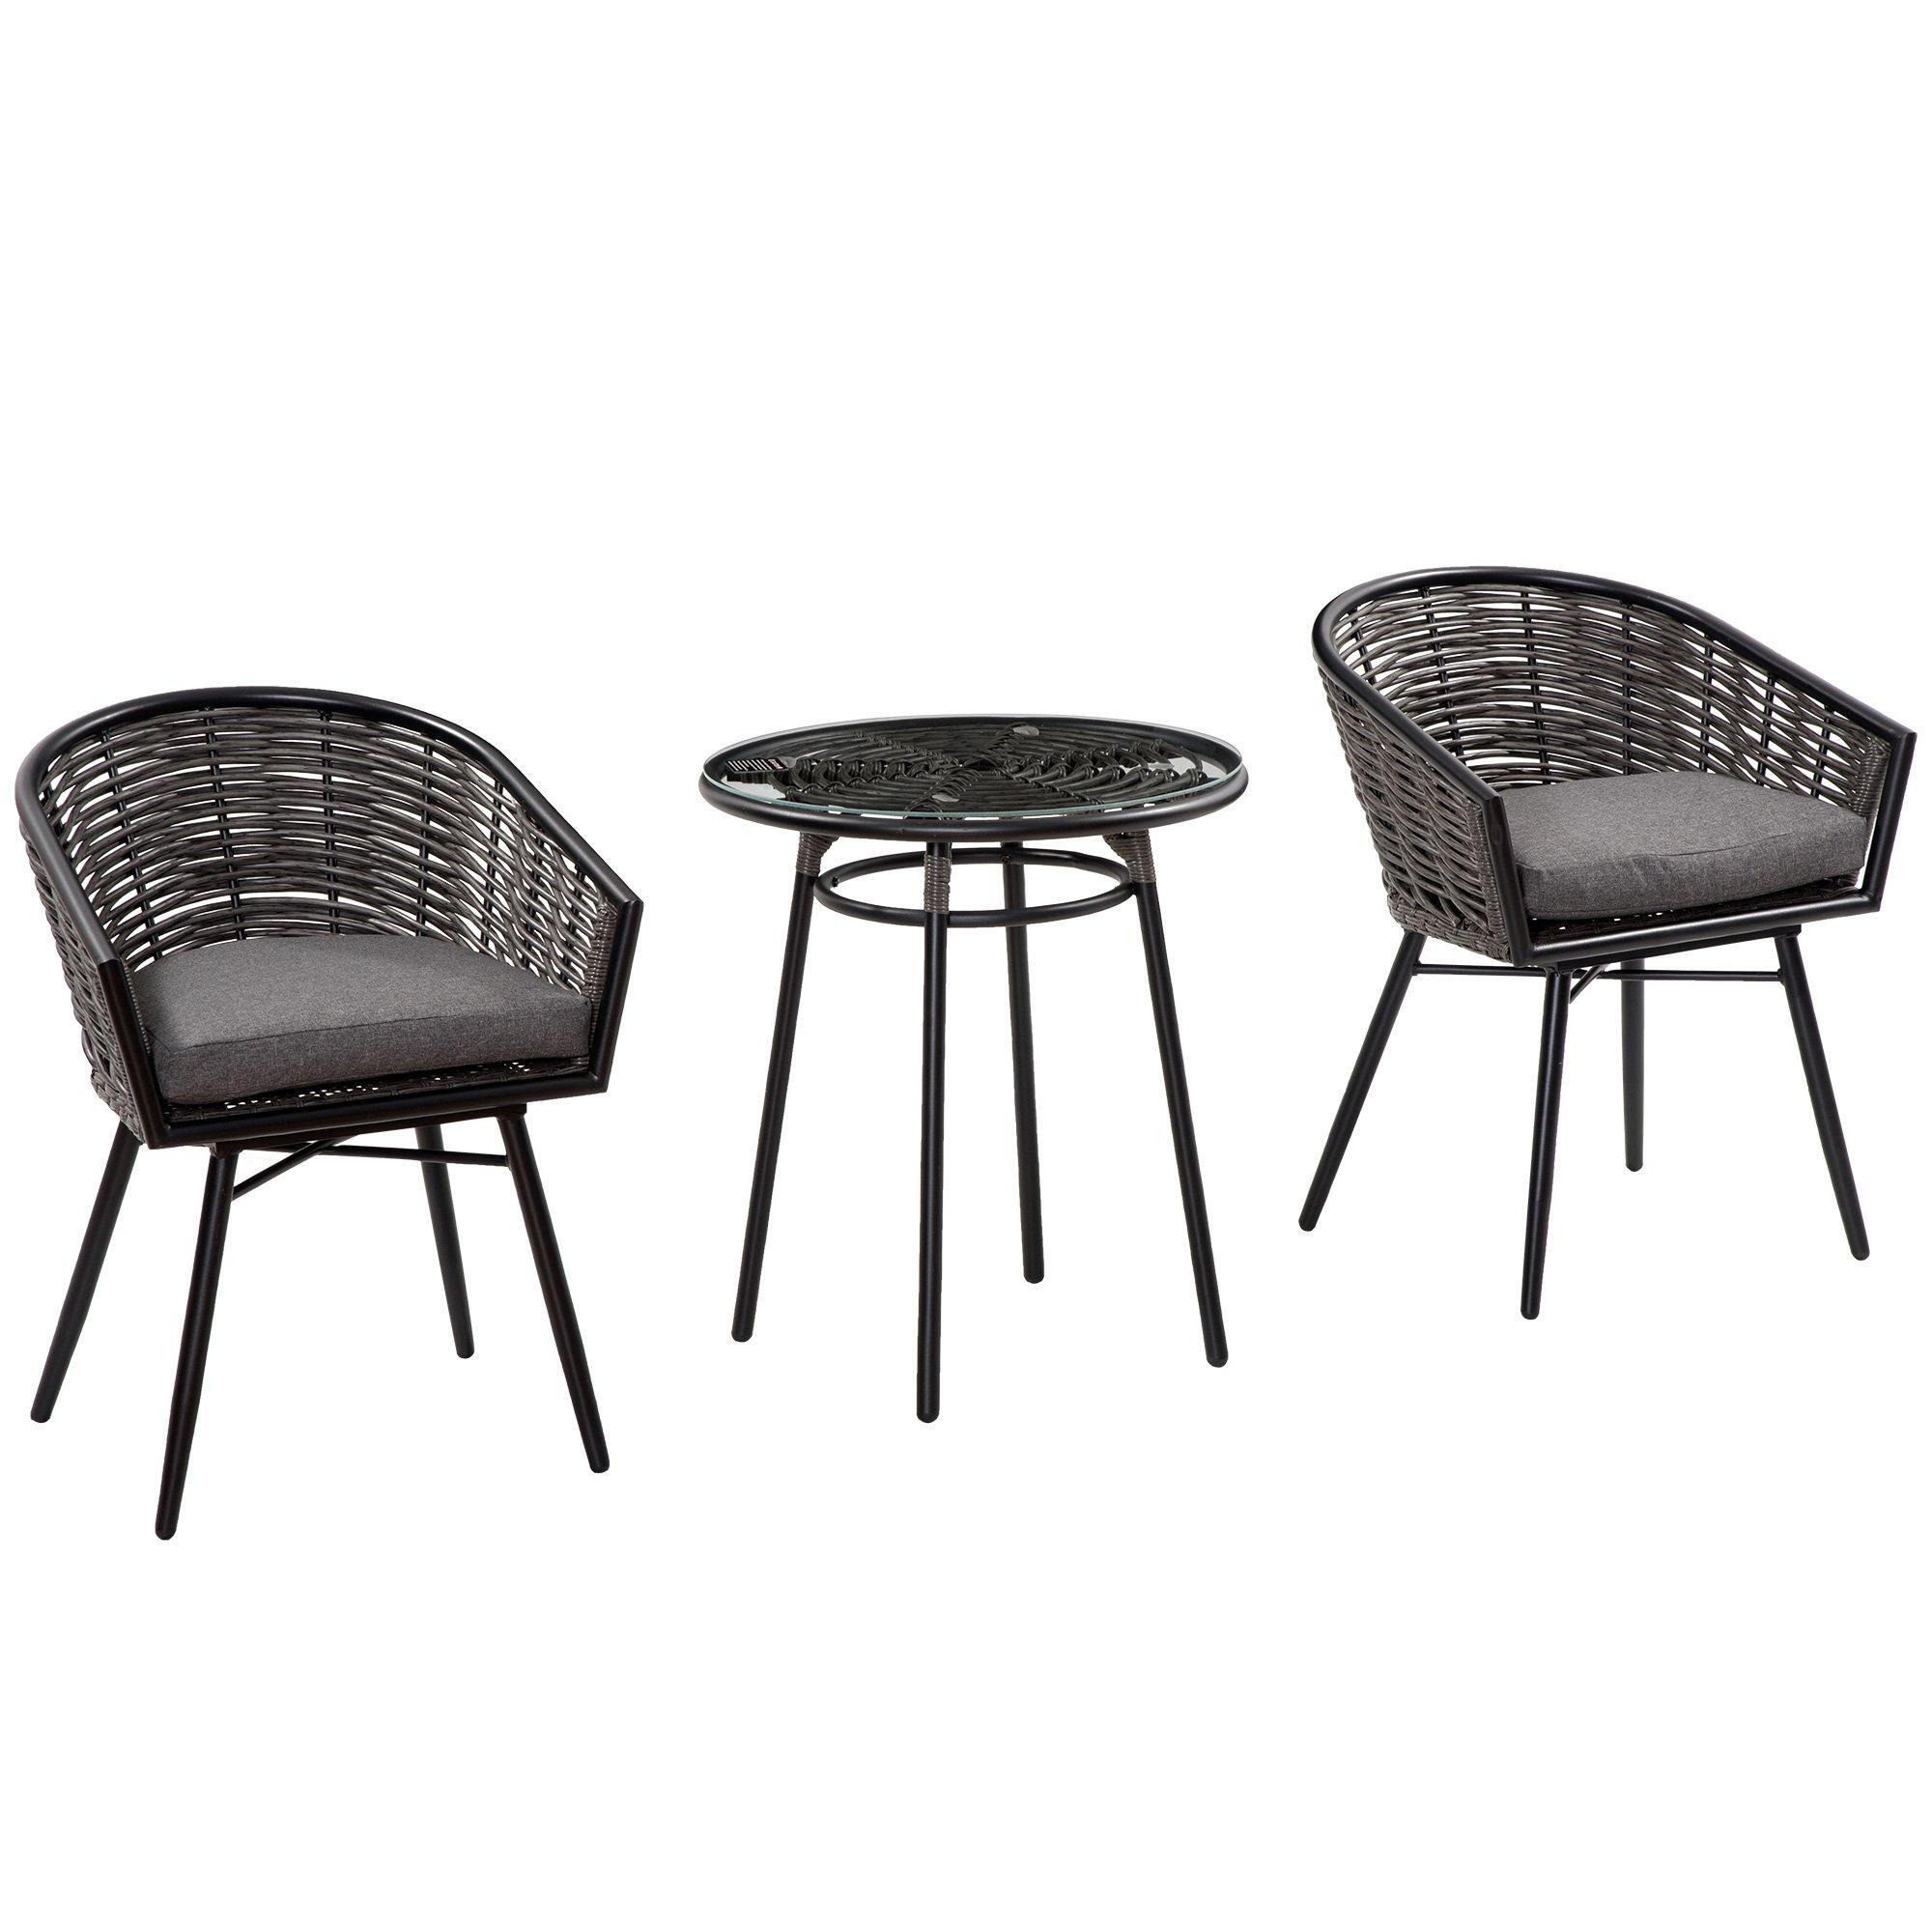 3 PCS Patio Resin Wicker Bistro Set w/ 2 Chairs & 1 Coffee Table for Garden - image 1